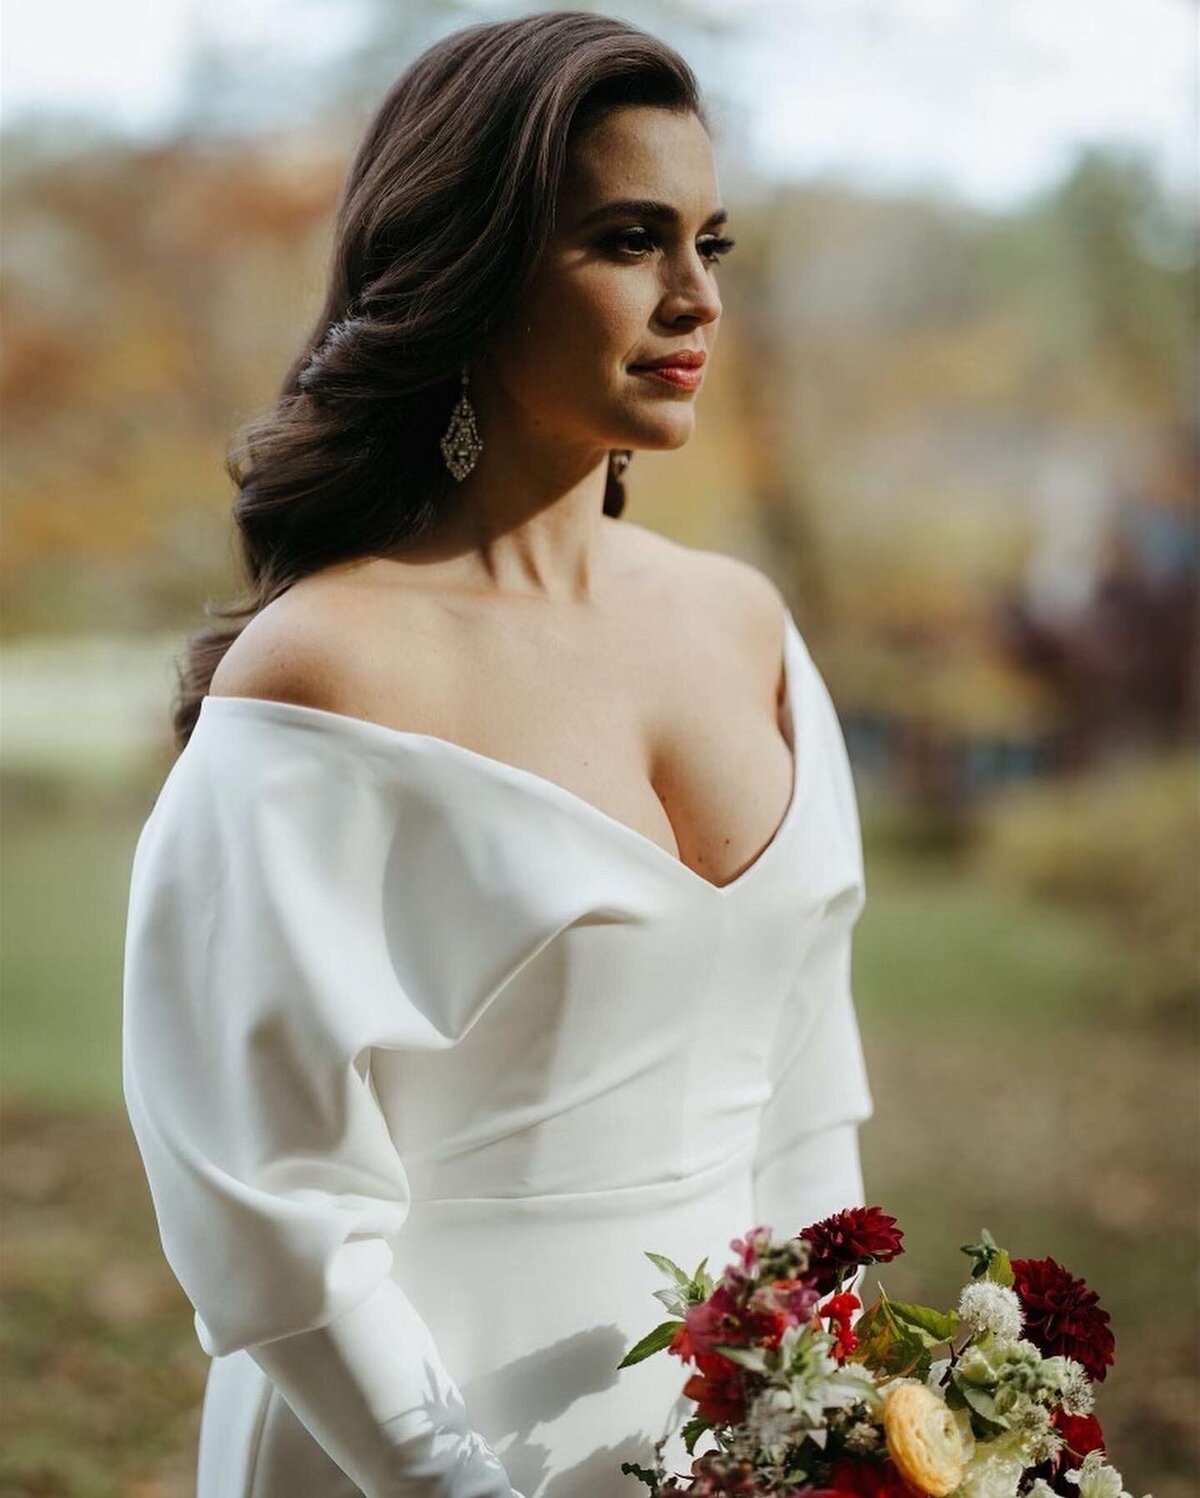 erica-renee-beauty-hair-and-makeup-duo-traveling-Berkshires-Stonover-Farm-Lenox-Brunette-soft-waves-glam-red-lip-long-sleeved-down-waves-hollywood-hairstyle